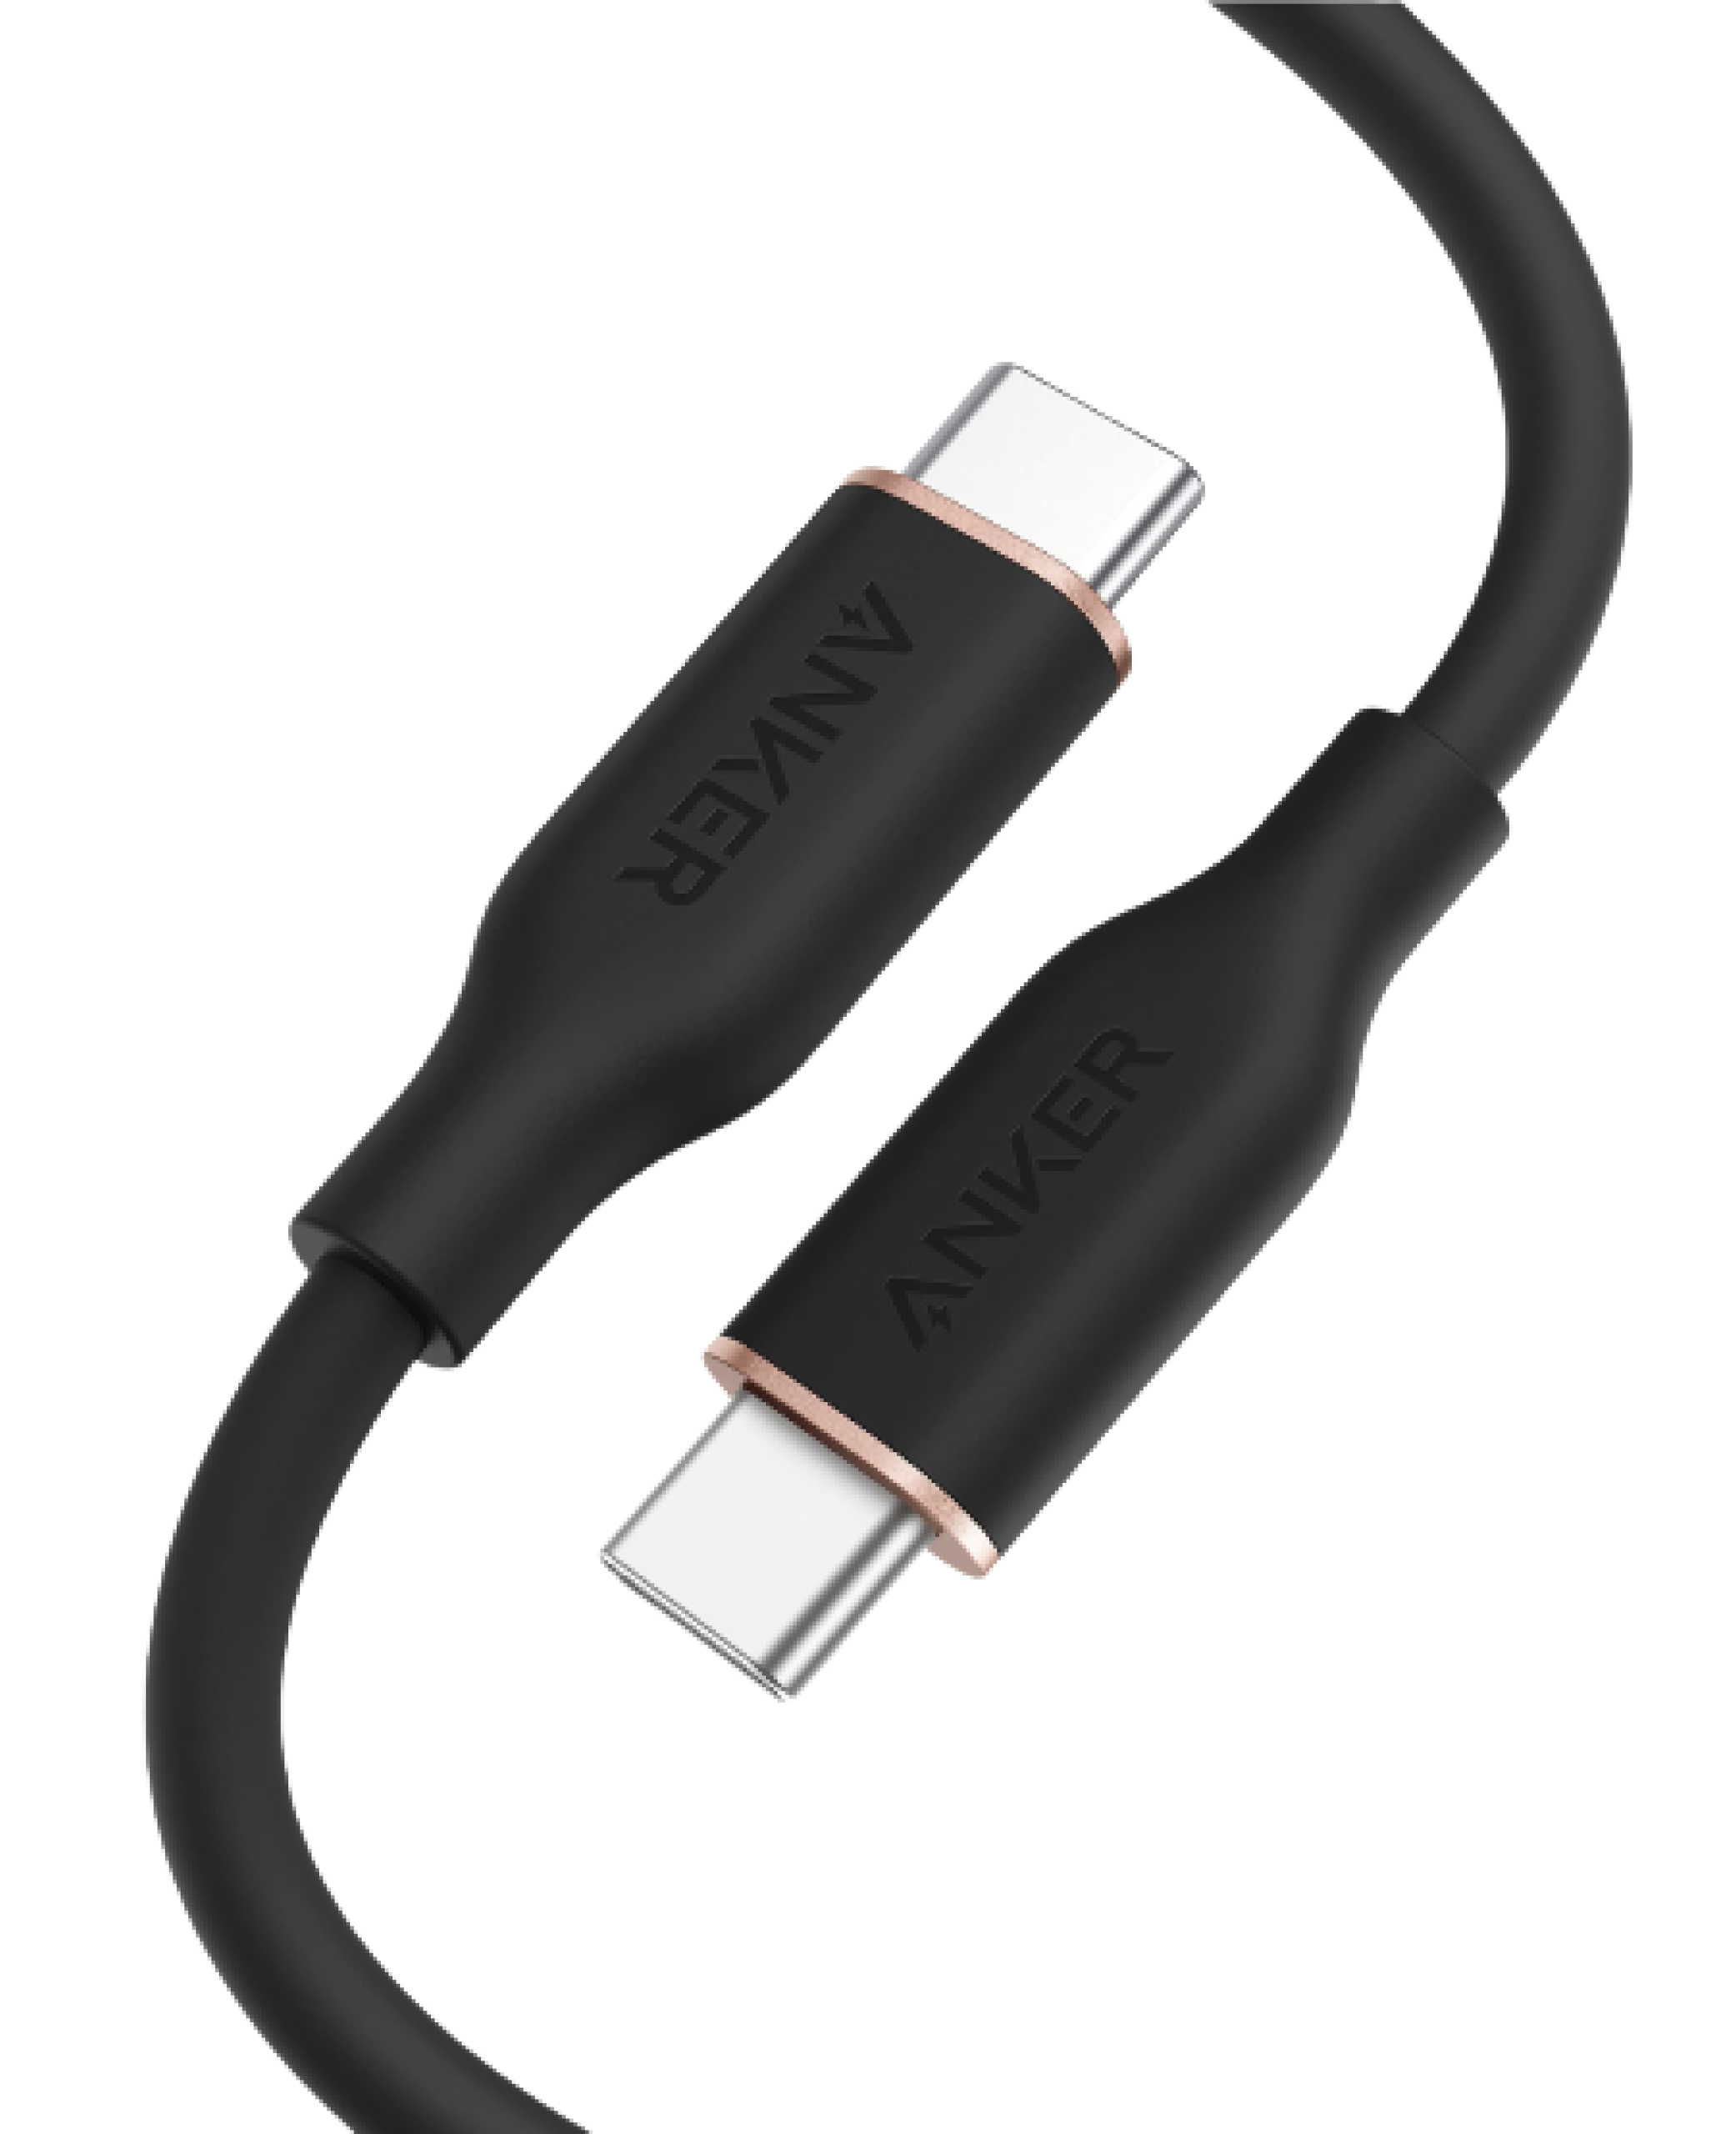 Charging Cable for MacBook Pro - Anker US